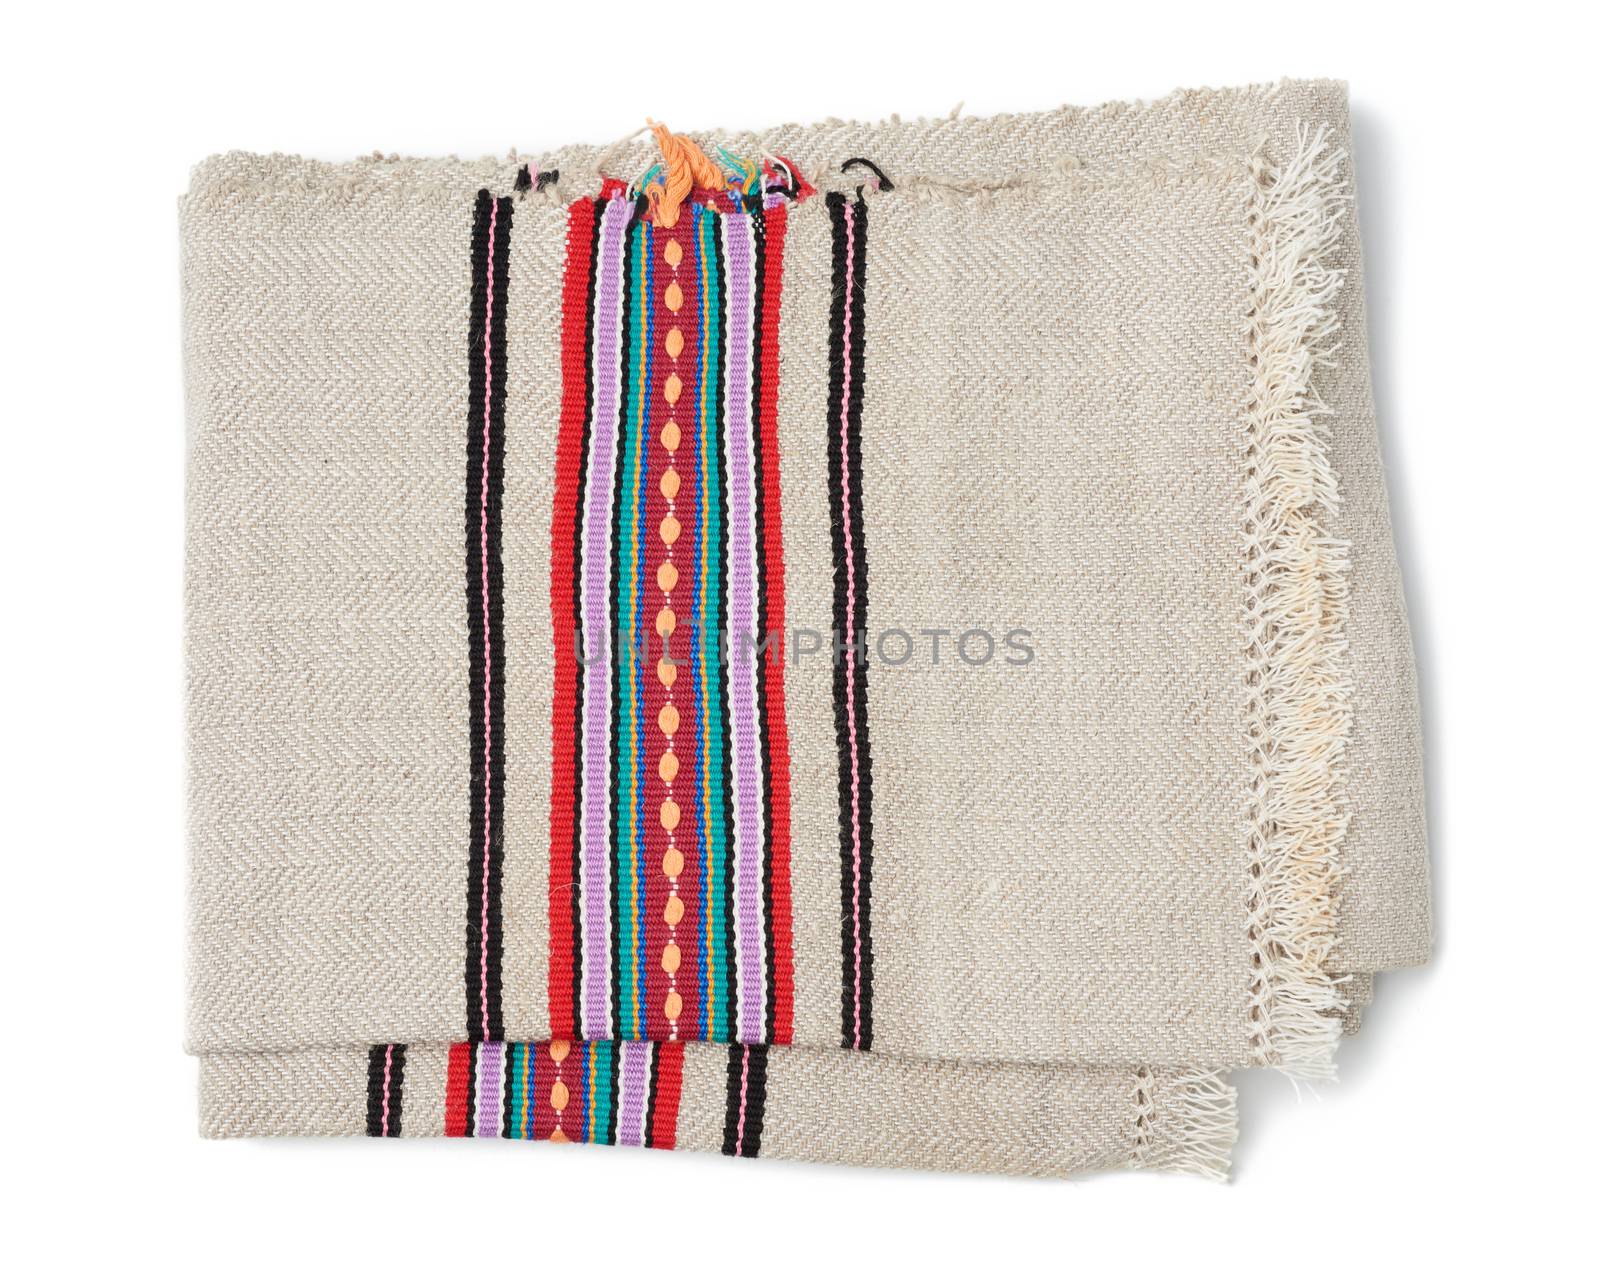 folded gray woven linen towel with colorful inserts by ndanko